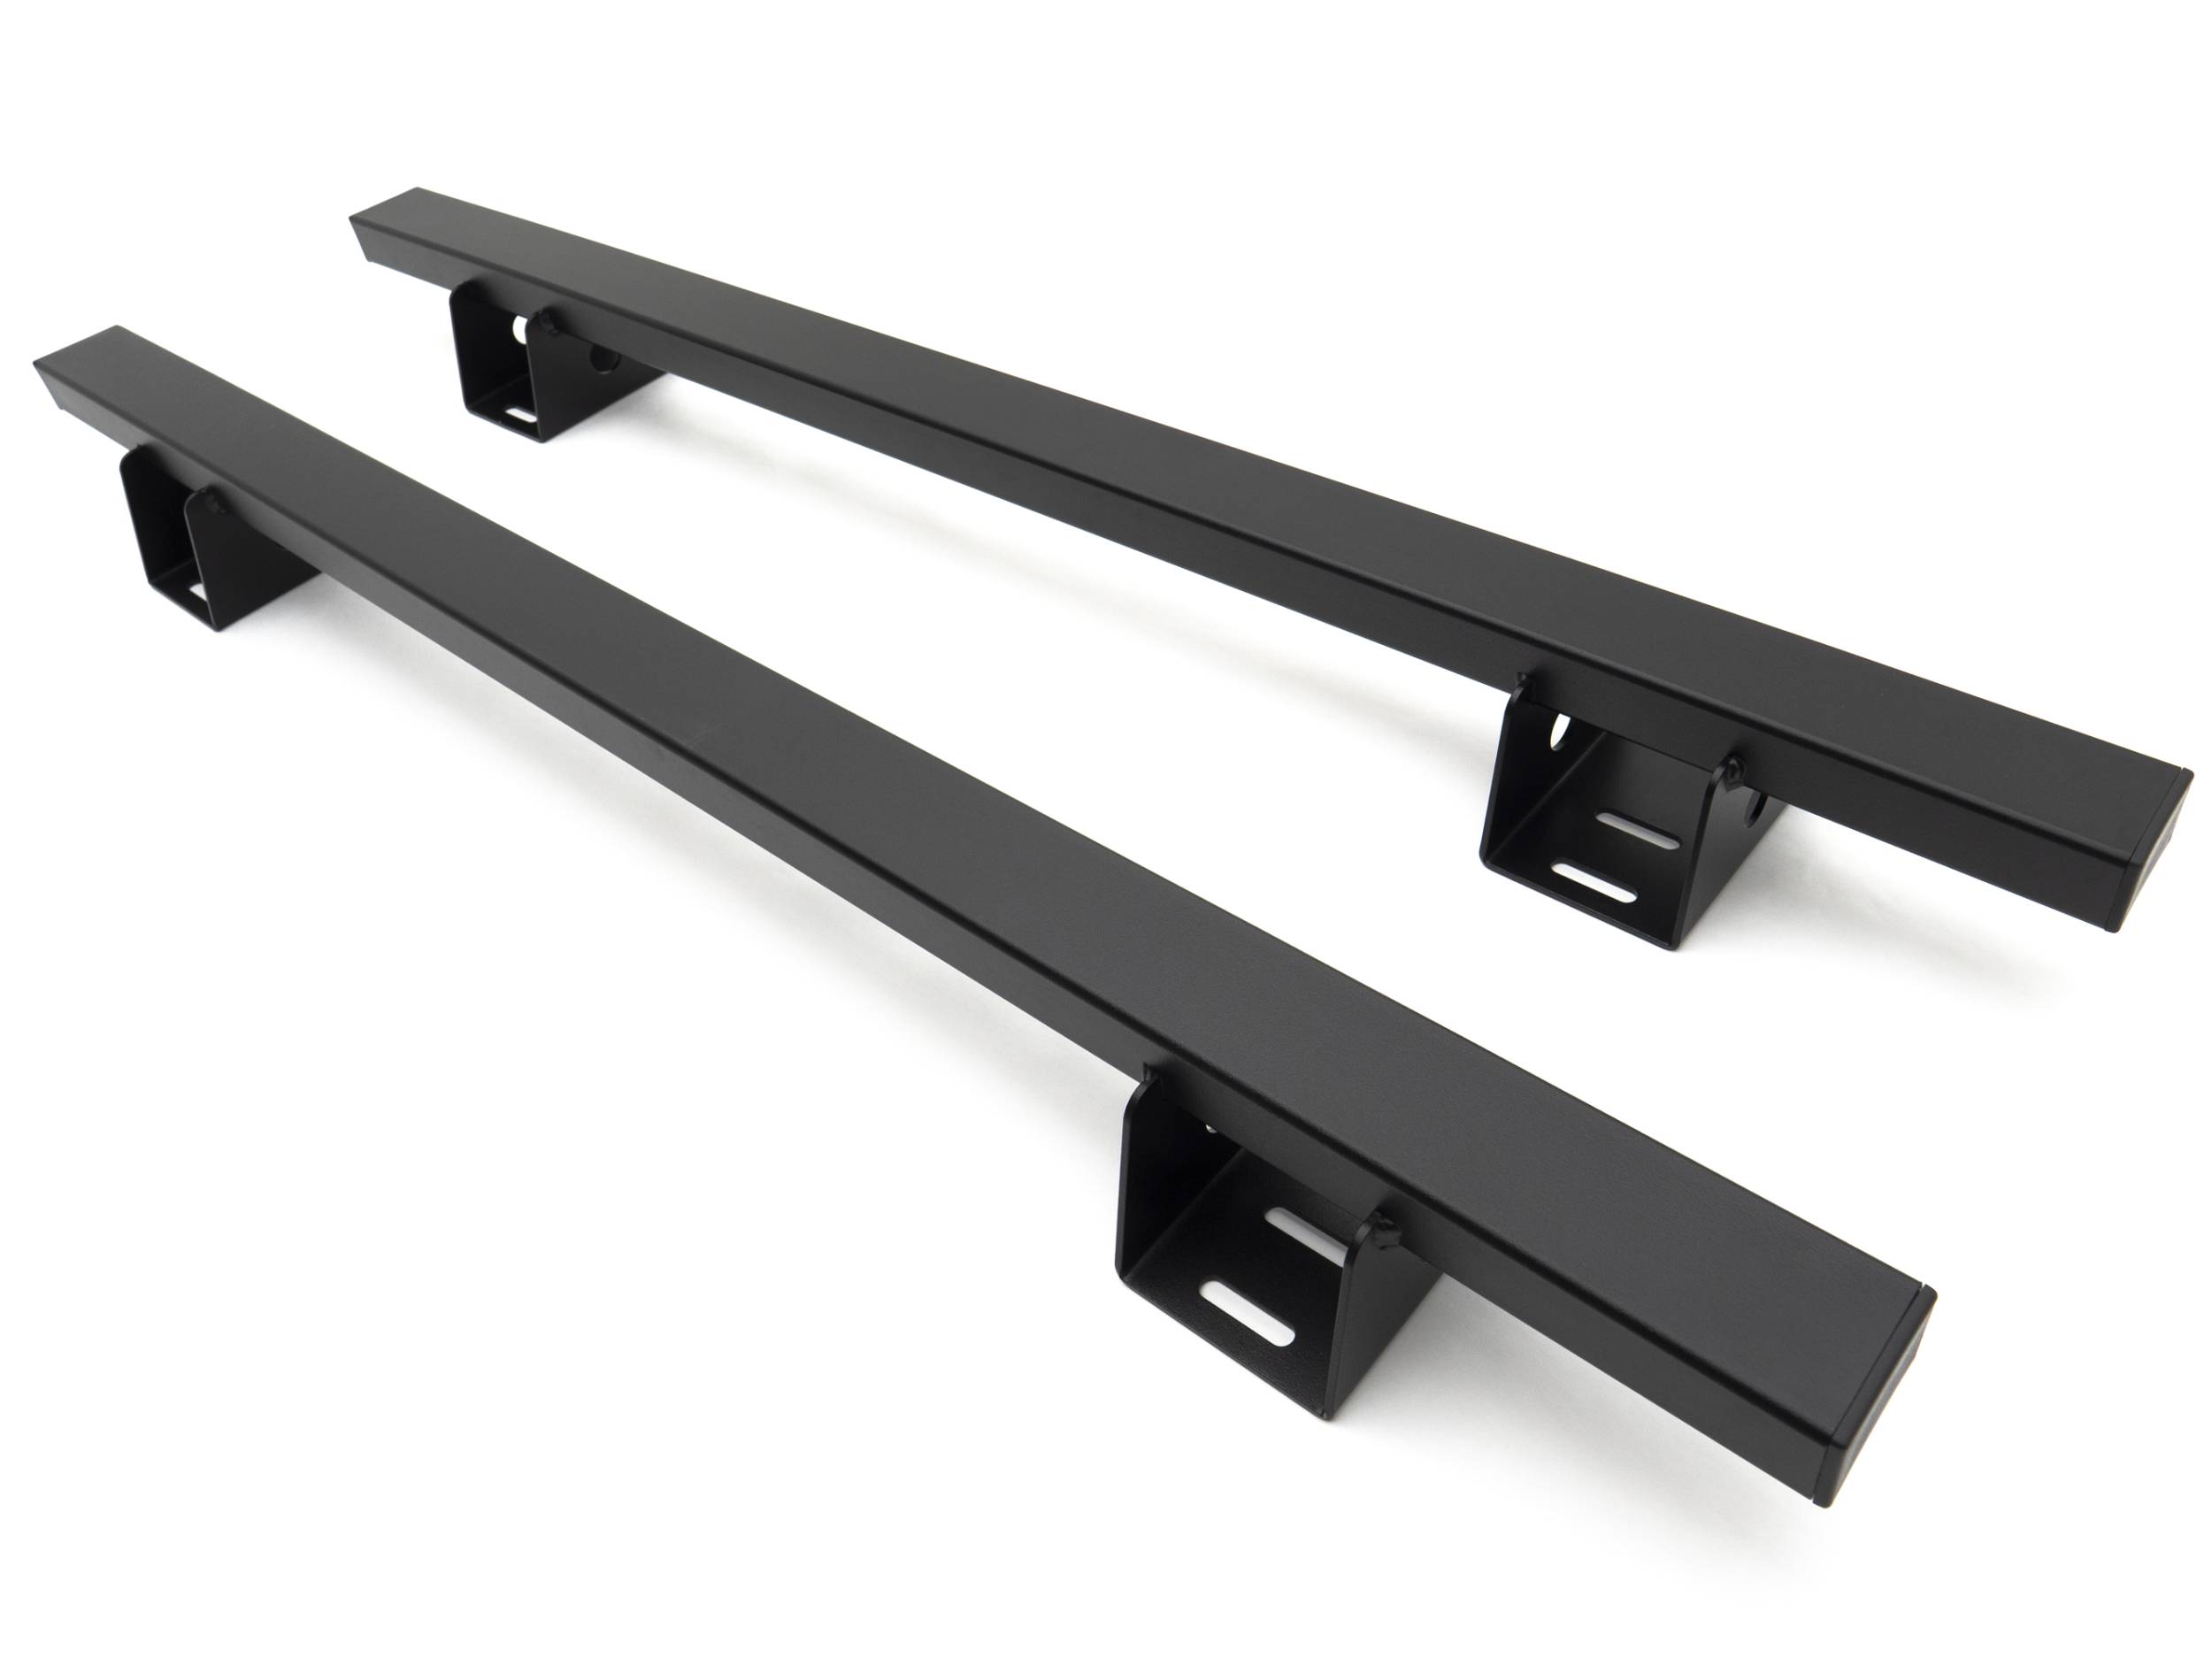 ZROADZ OFF ROAD PRODUCTS - 2019-2023 Jeep Gladiator Access Overland Rack Crossbars, Black, Mild Steel, Bolt-On, 2 Pc Set with Hardware - Part # Z834011